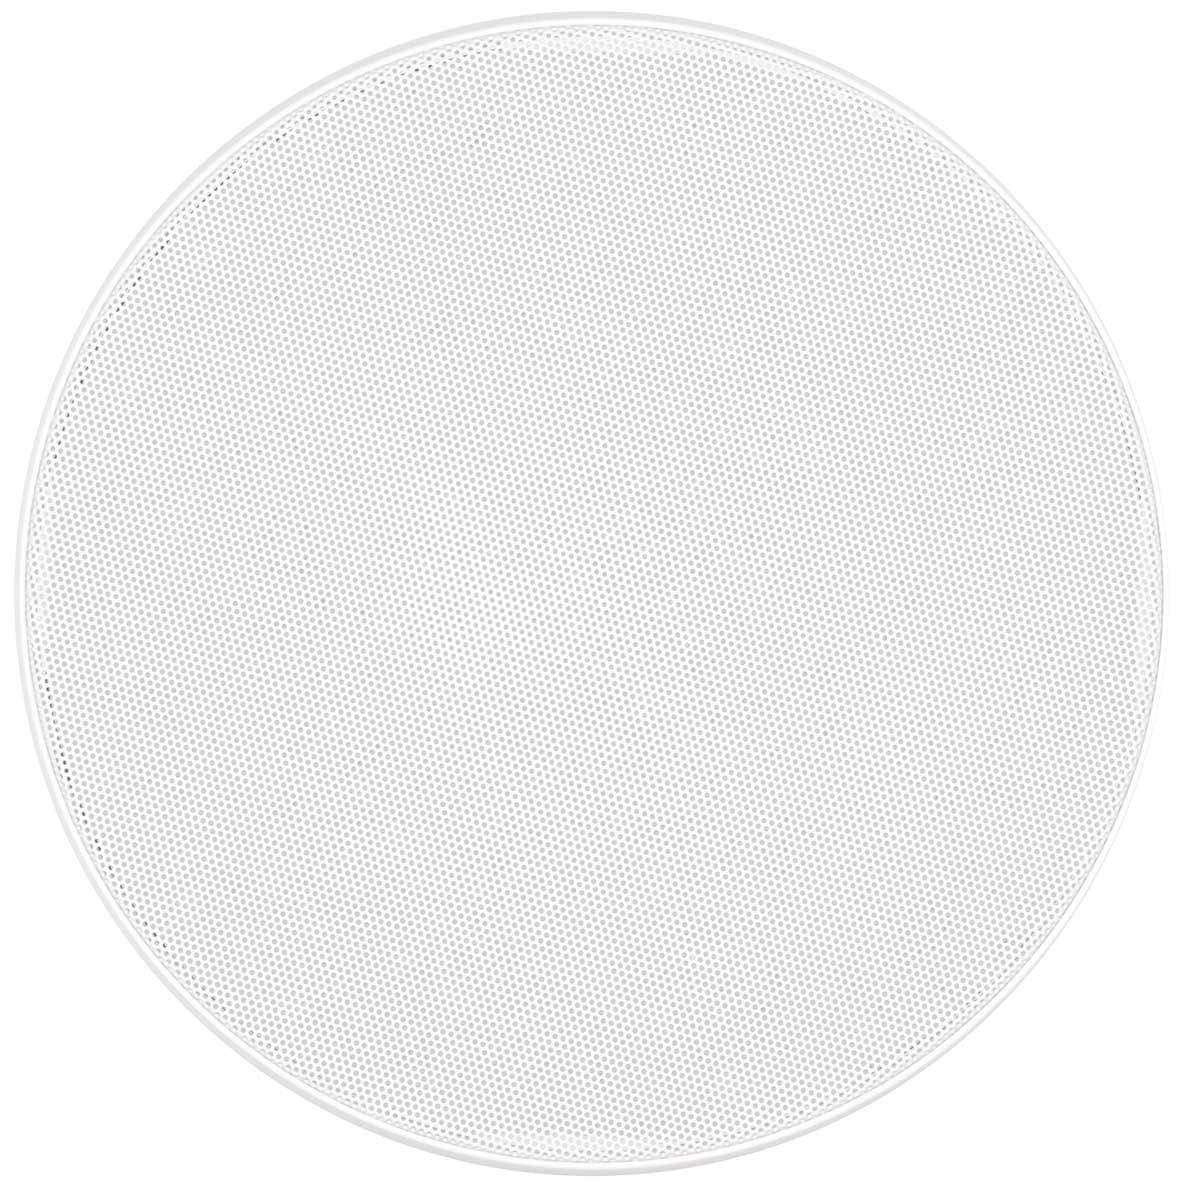 Monitor Audio Slim 180 In-Ceiling Speaker, front with round grille